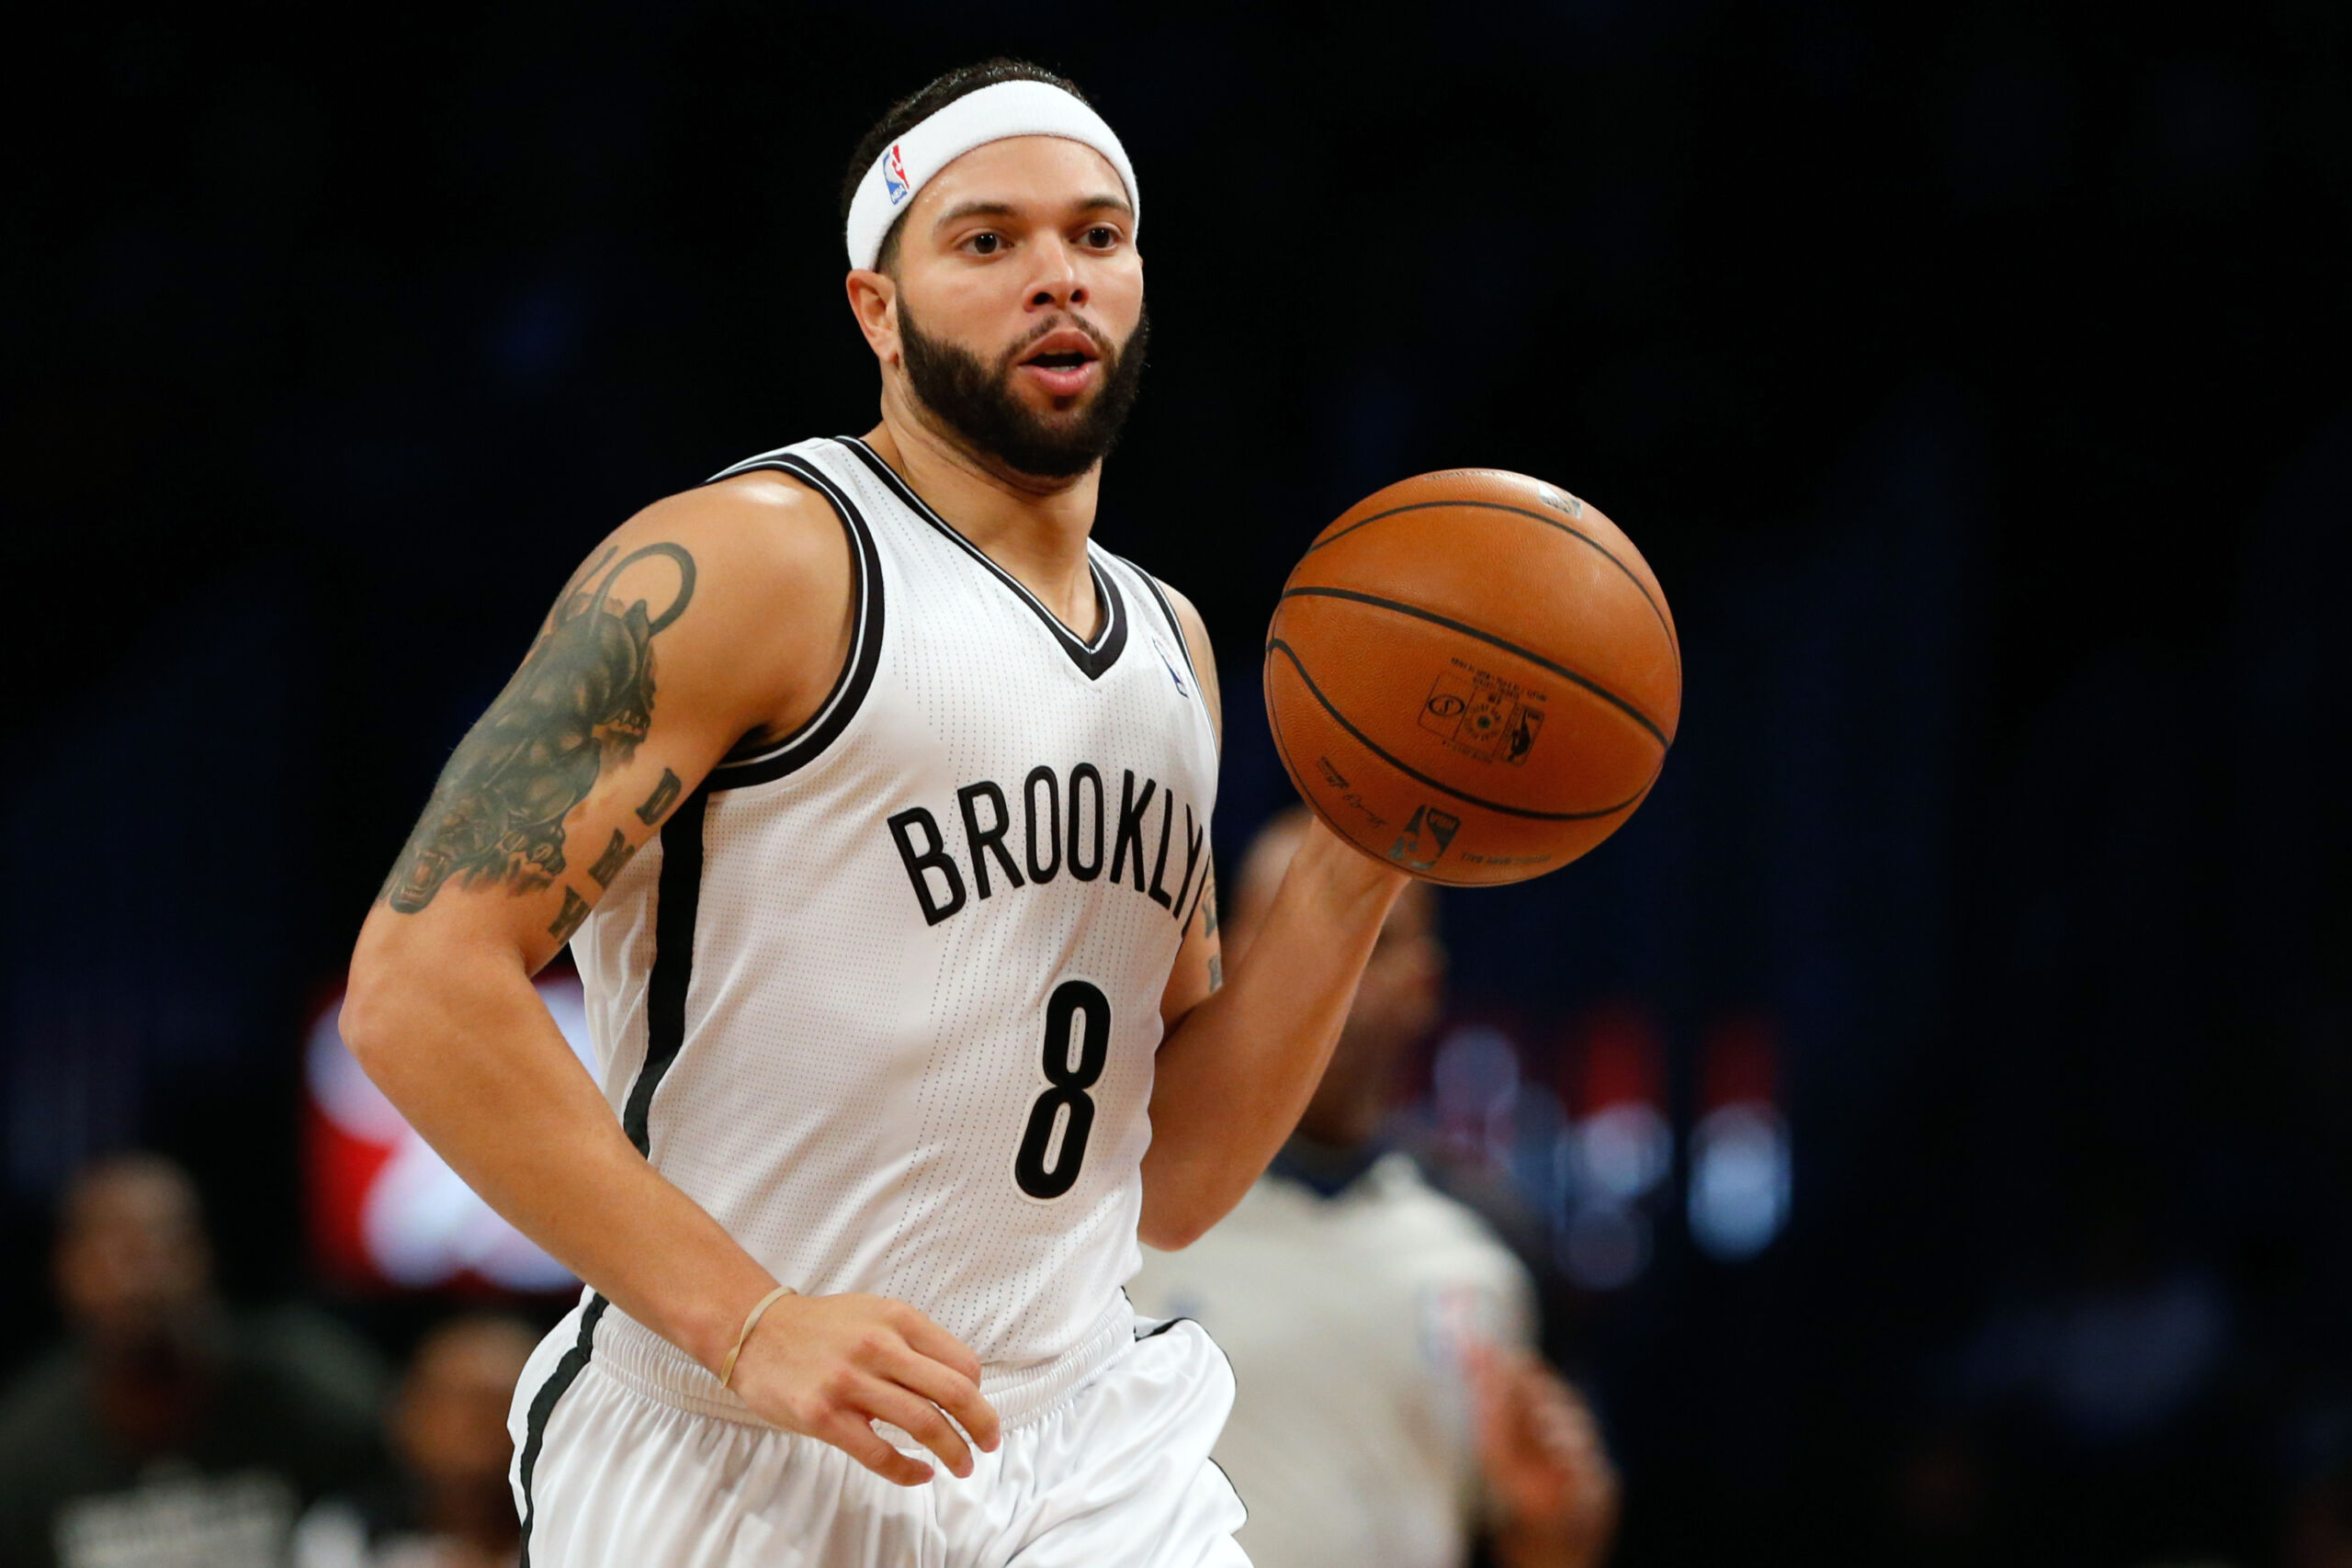 10 greatest Nets players in franchise history, ranked